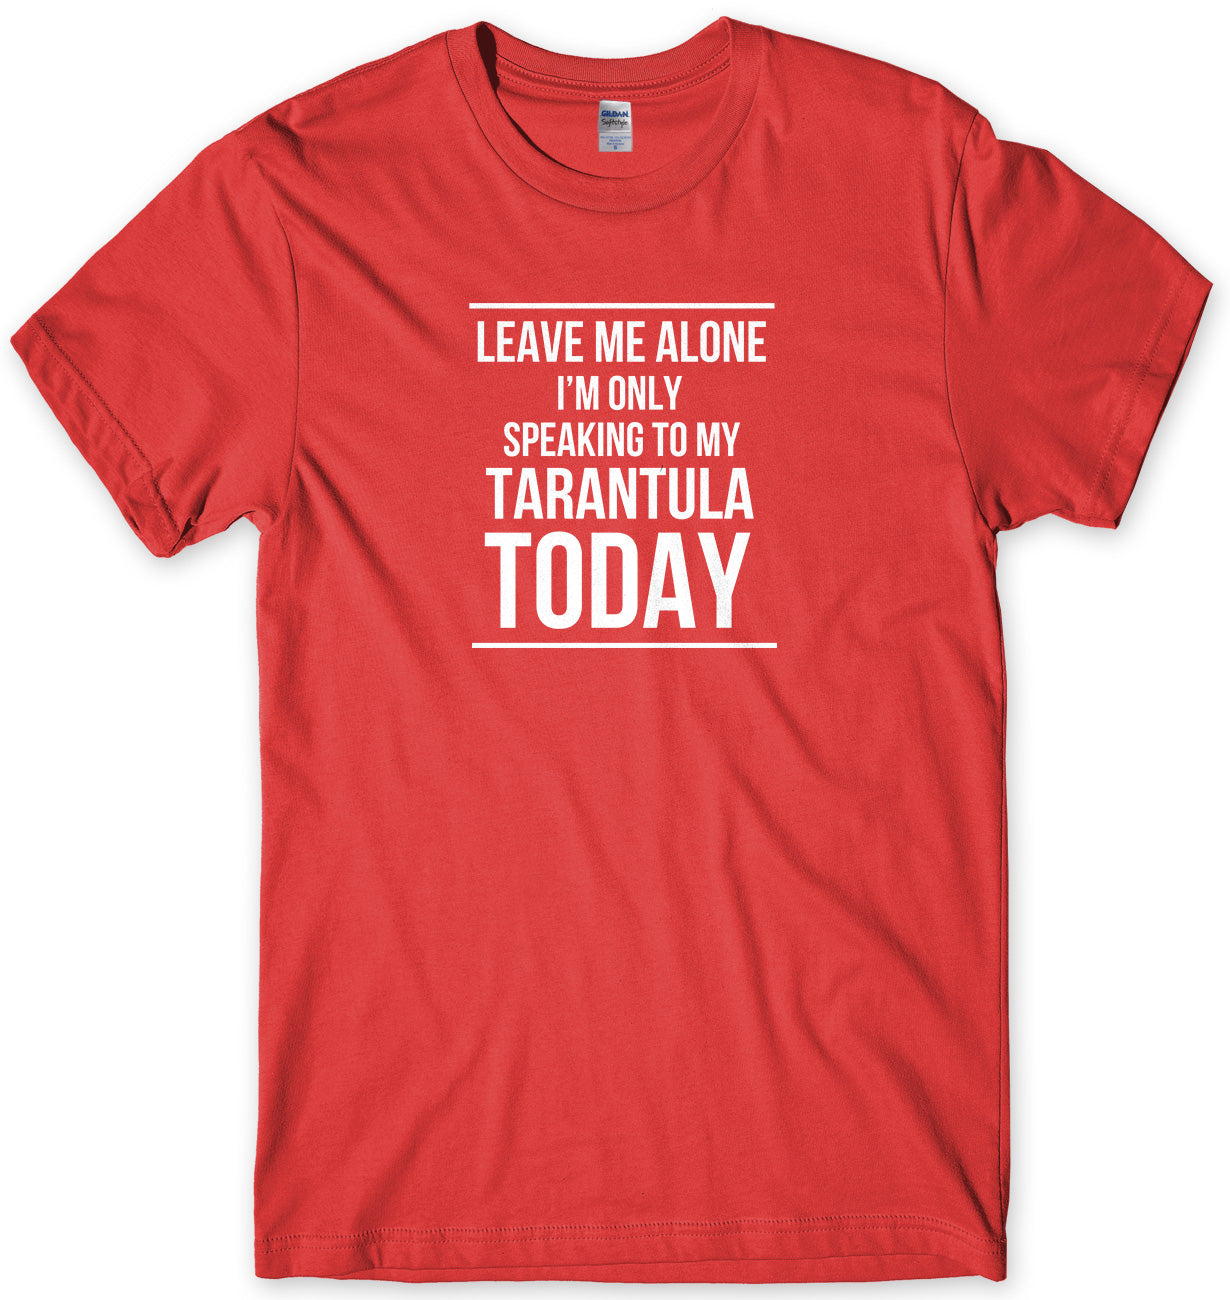 LEAVE ME ALONE I'M ONLY SPEAKING TO MY TARANTULA TODAY MENS FUNNY SLOGAN UNISEX T-SHIRT